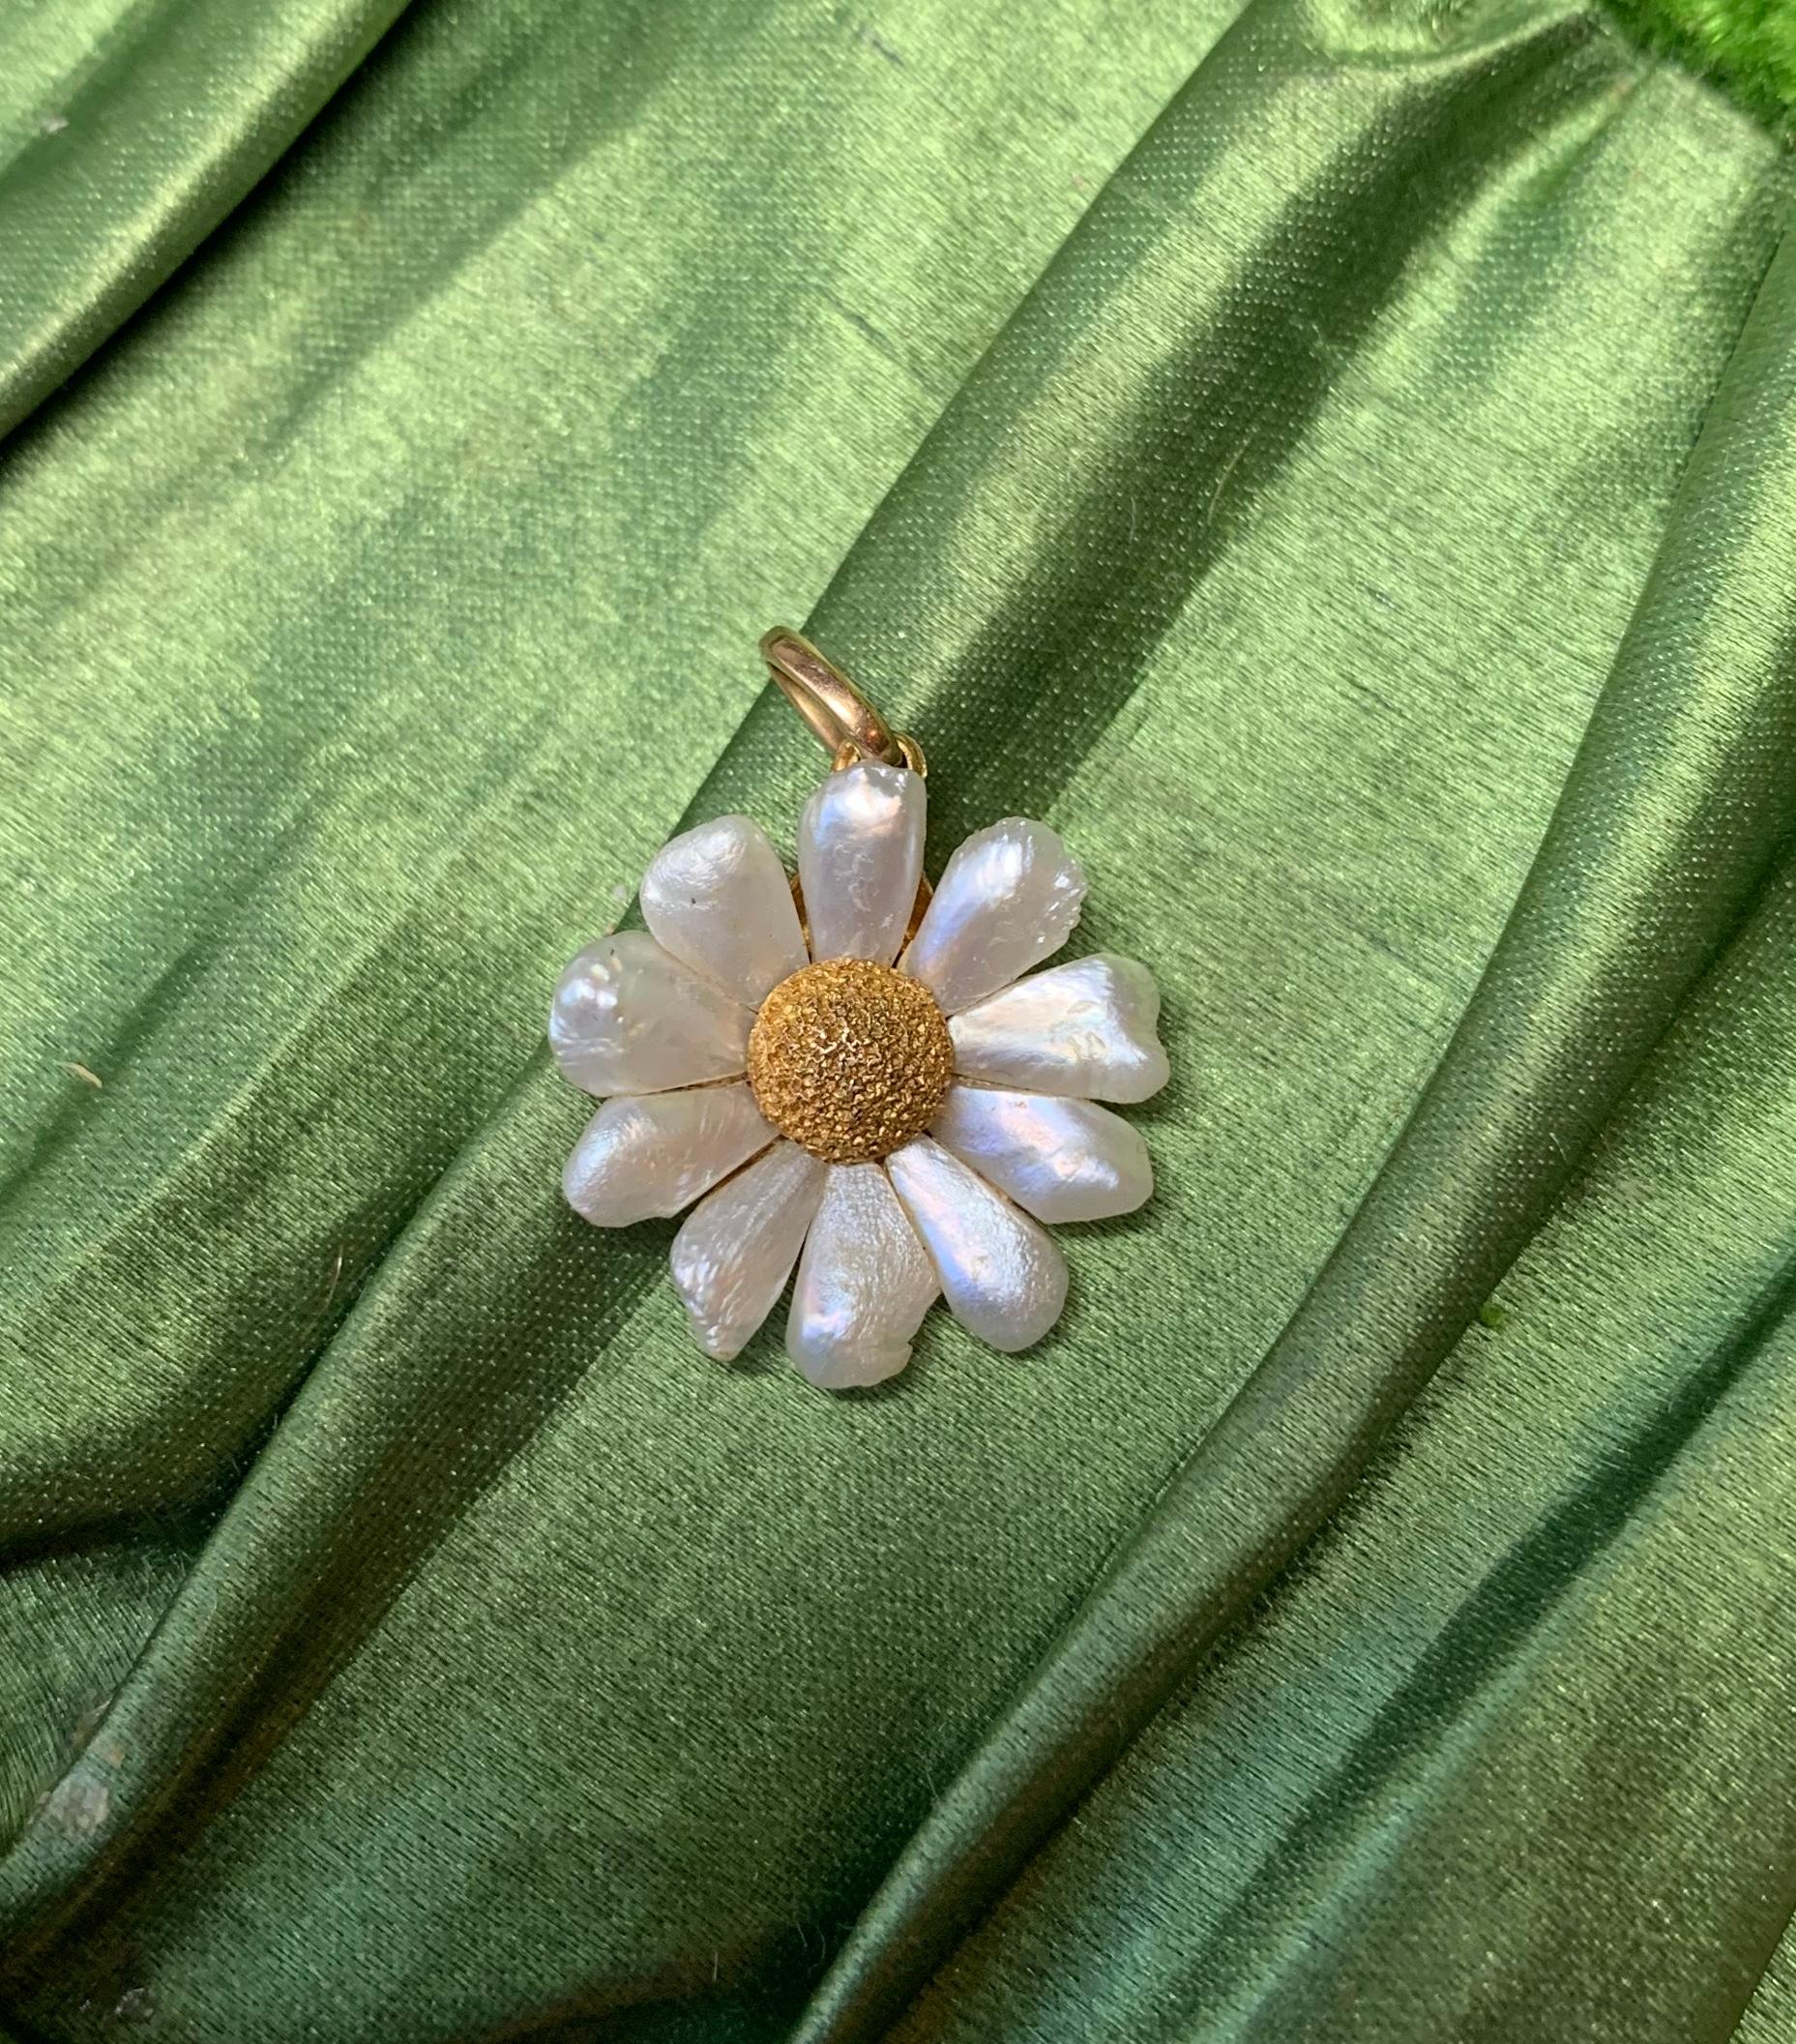 A gorgeous Daisy Flower pendant with stunning pearl petals and a lovely brushed 14 Karat Yellow Gold center.  Just a charming delicate romantic Daisy pendant charm to hang from your favorite necklace or bracelet.

The pendant is 17mm long without